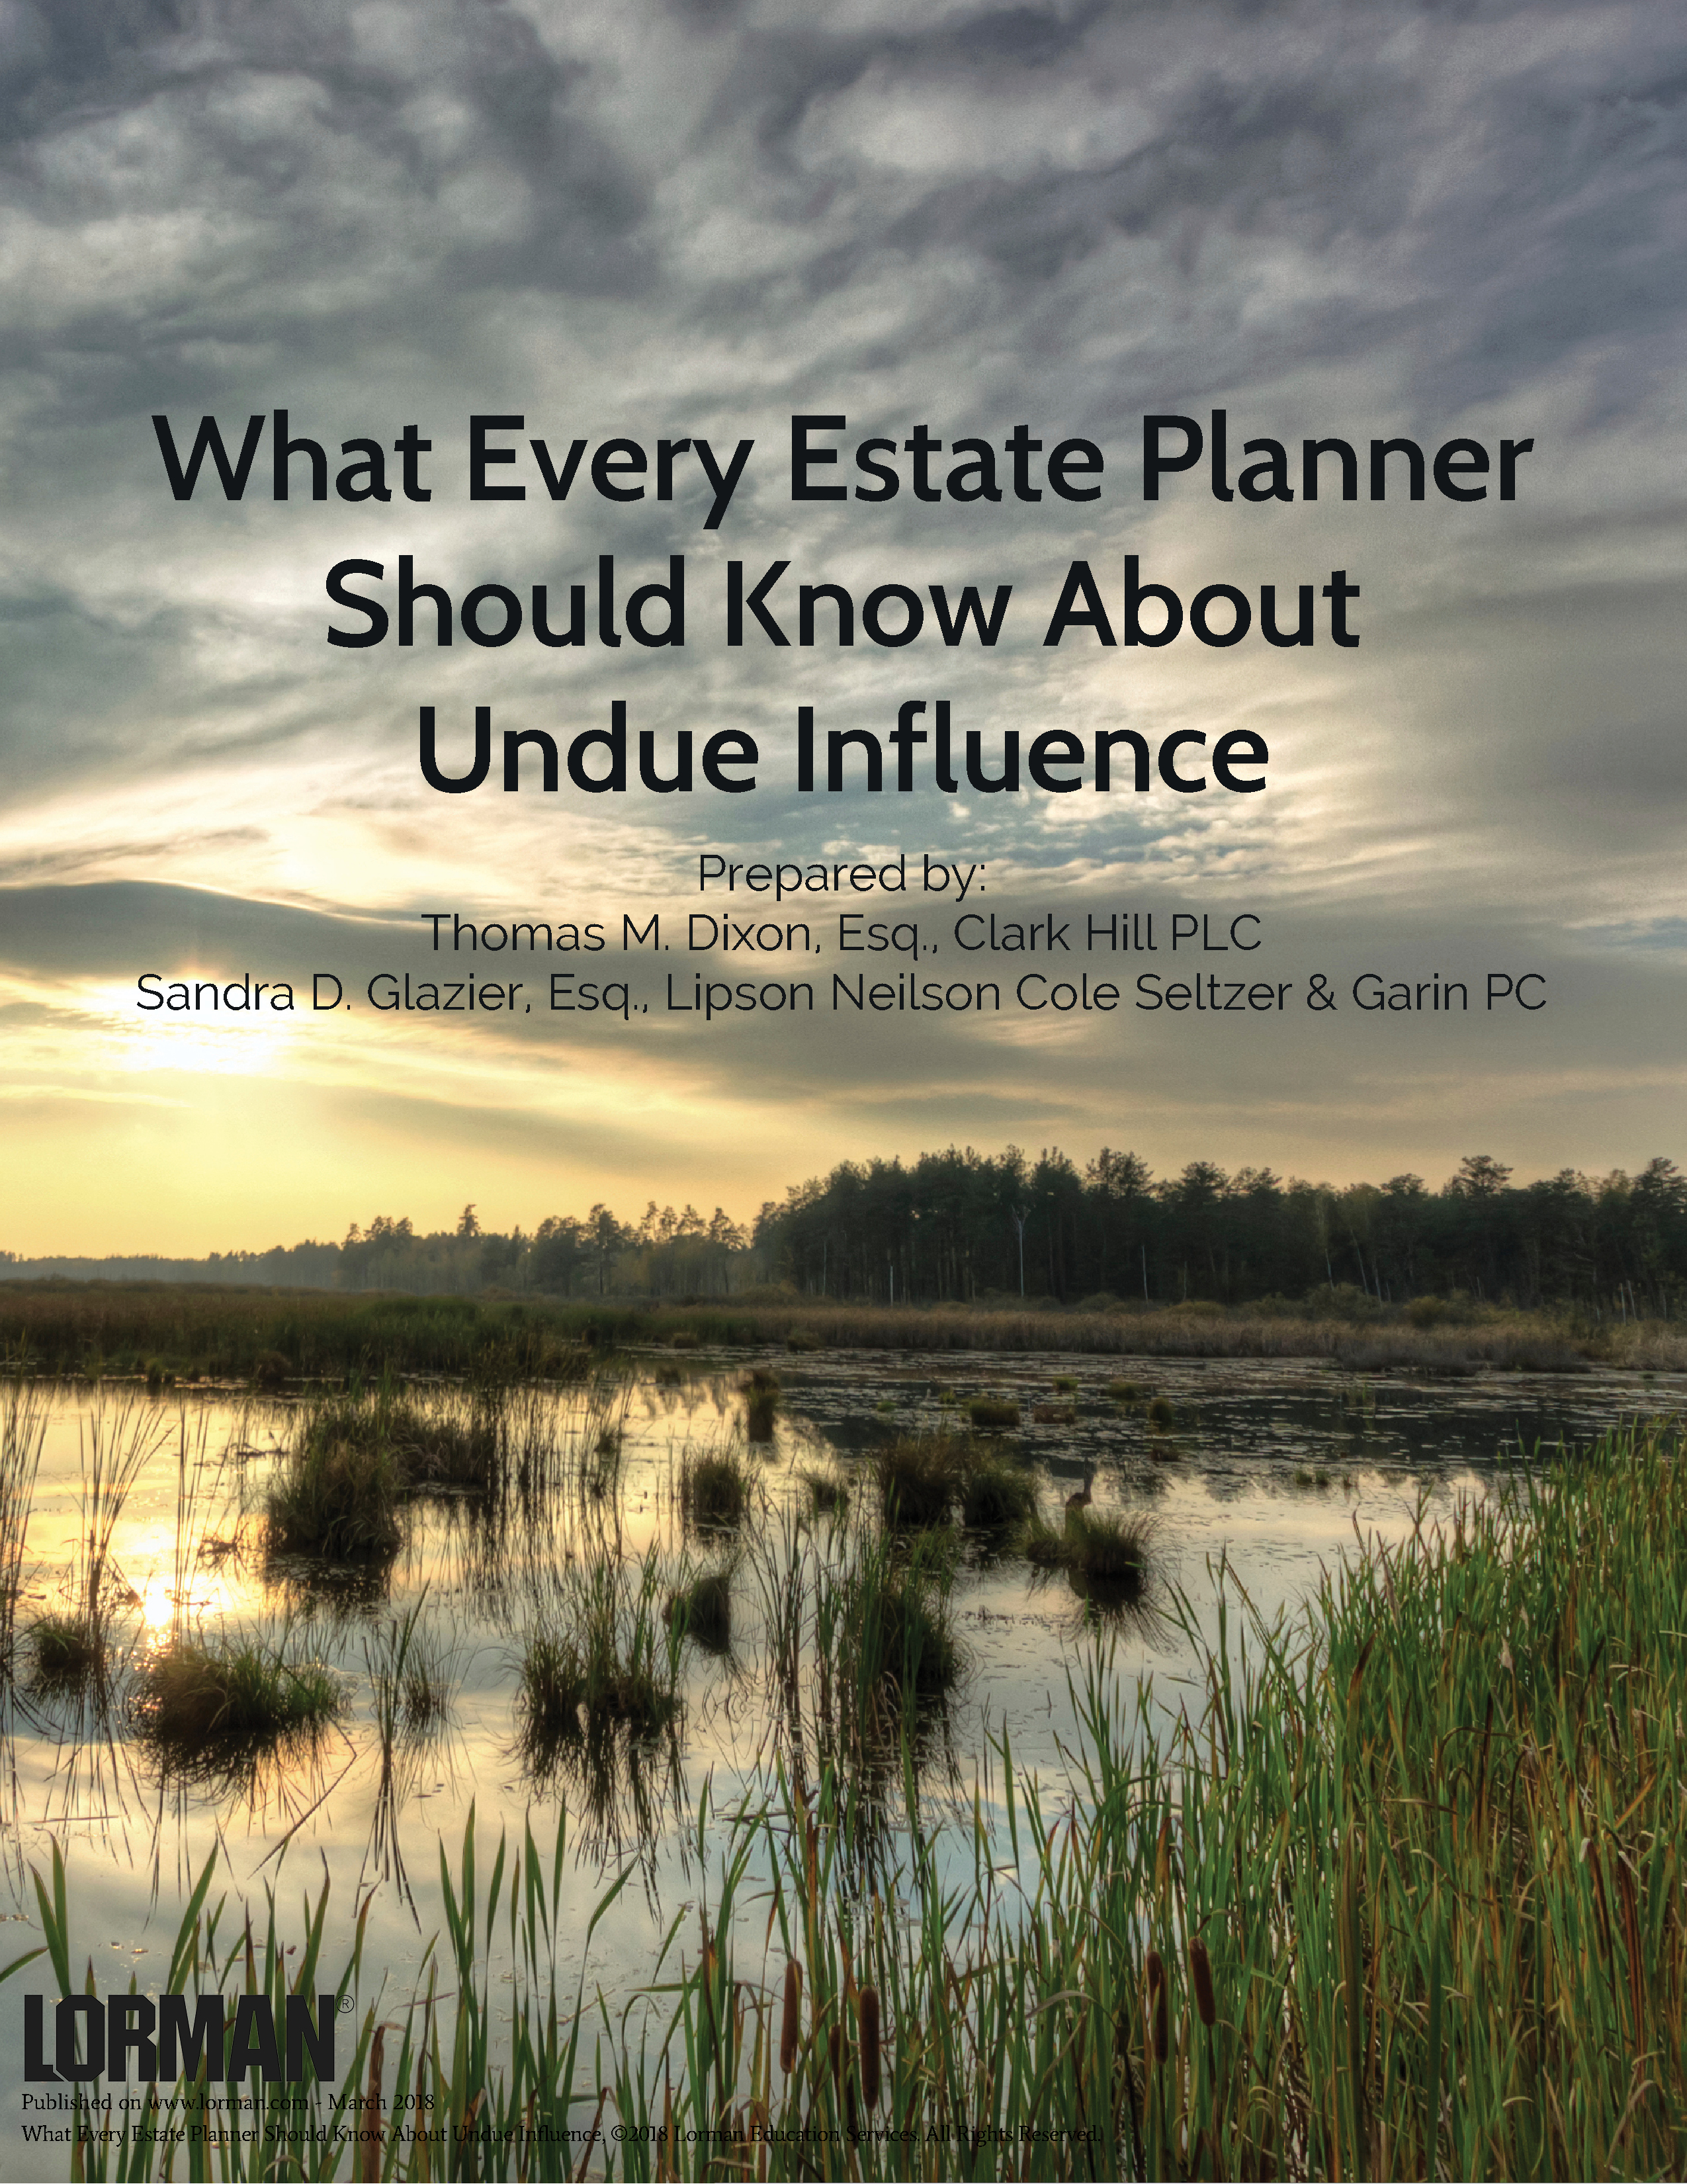 What Every Estate Planner Should Know About Undue Influence